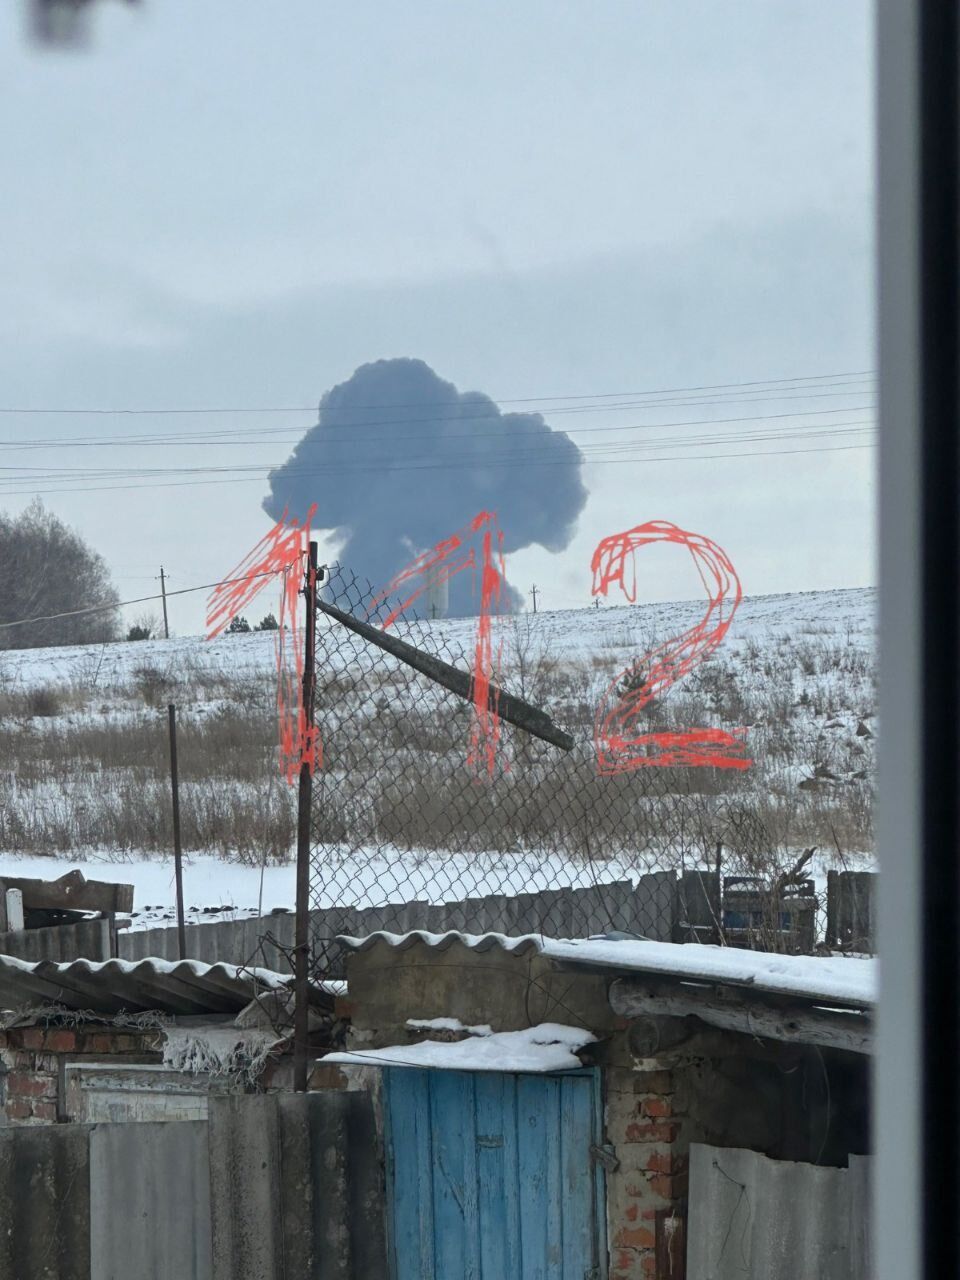 An Il-76 military plane crashed in the Belgorod region, photos from the scene raised questions about what was wrong. Photos and videos